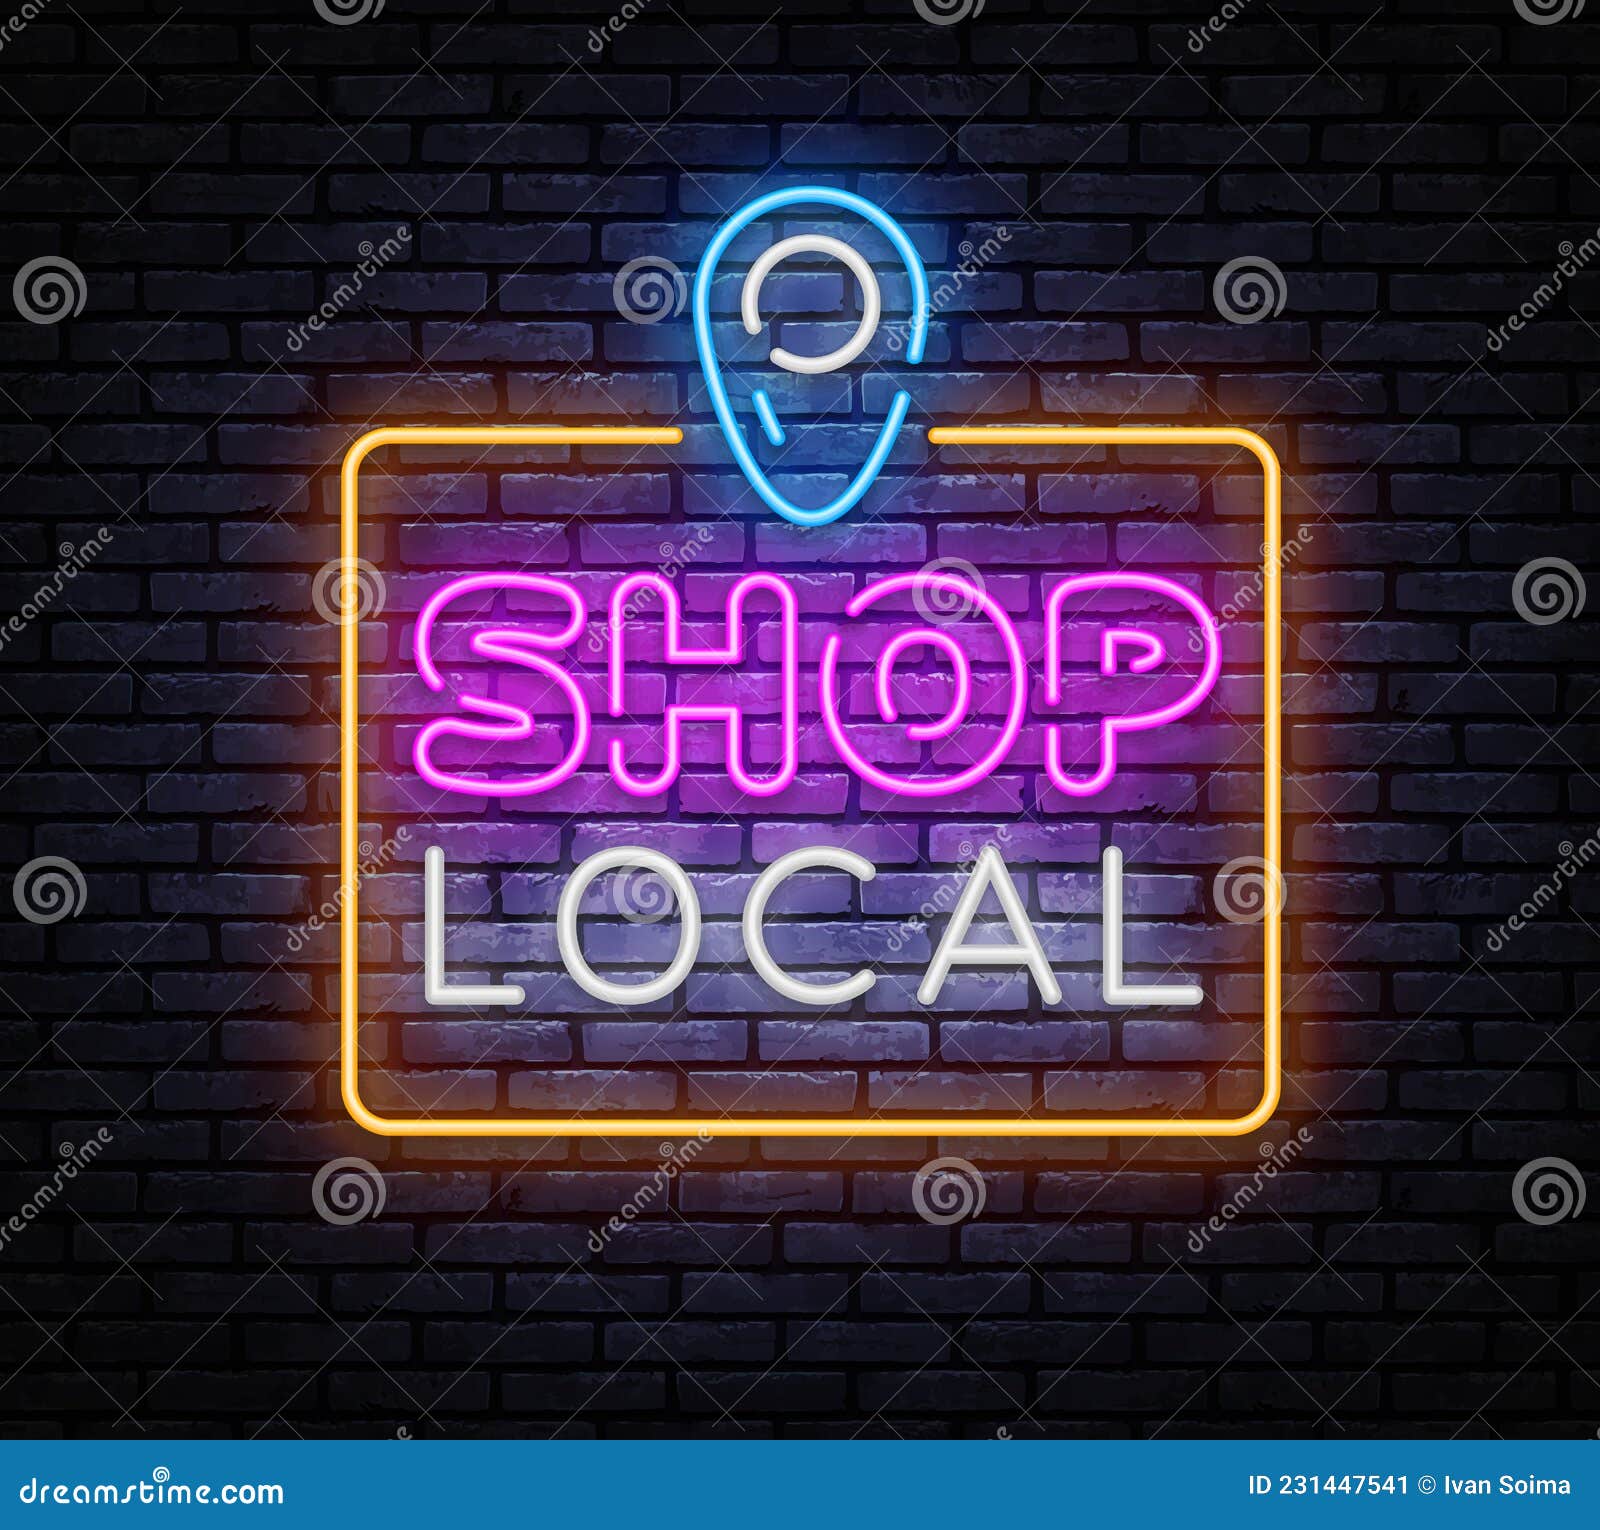 Local Neon Sign Stock Illustrations – 223 Local Neon Sign Stock ...